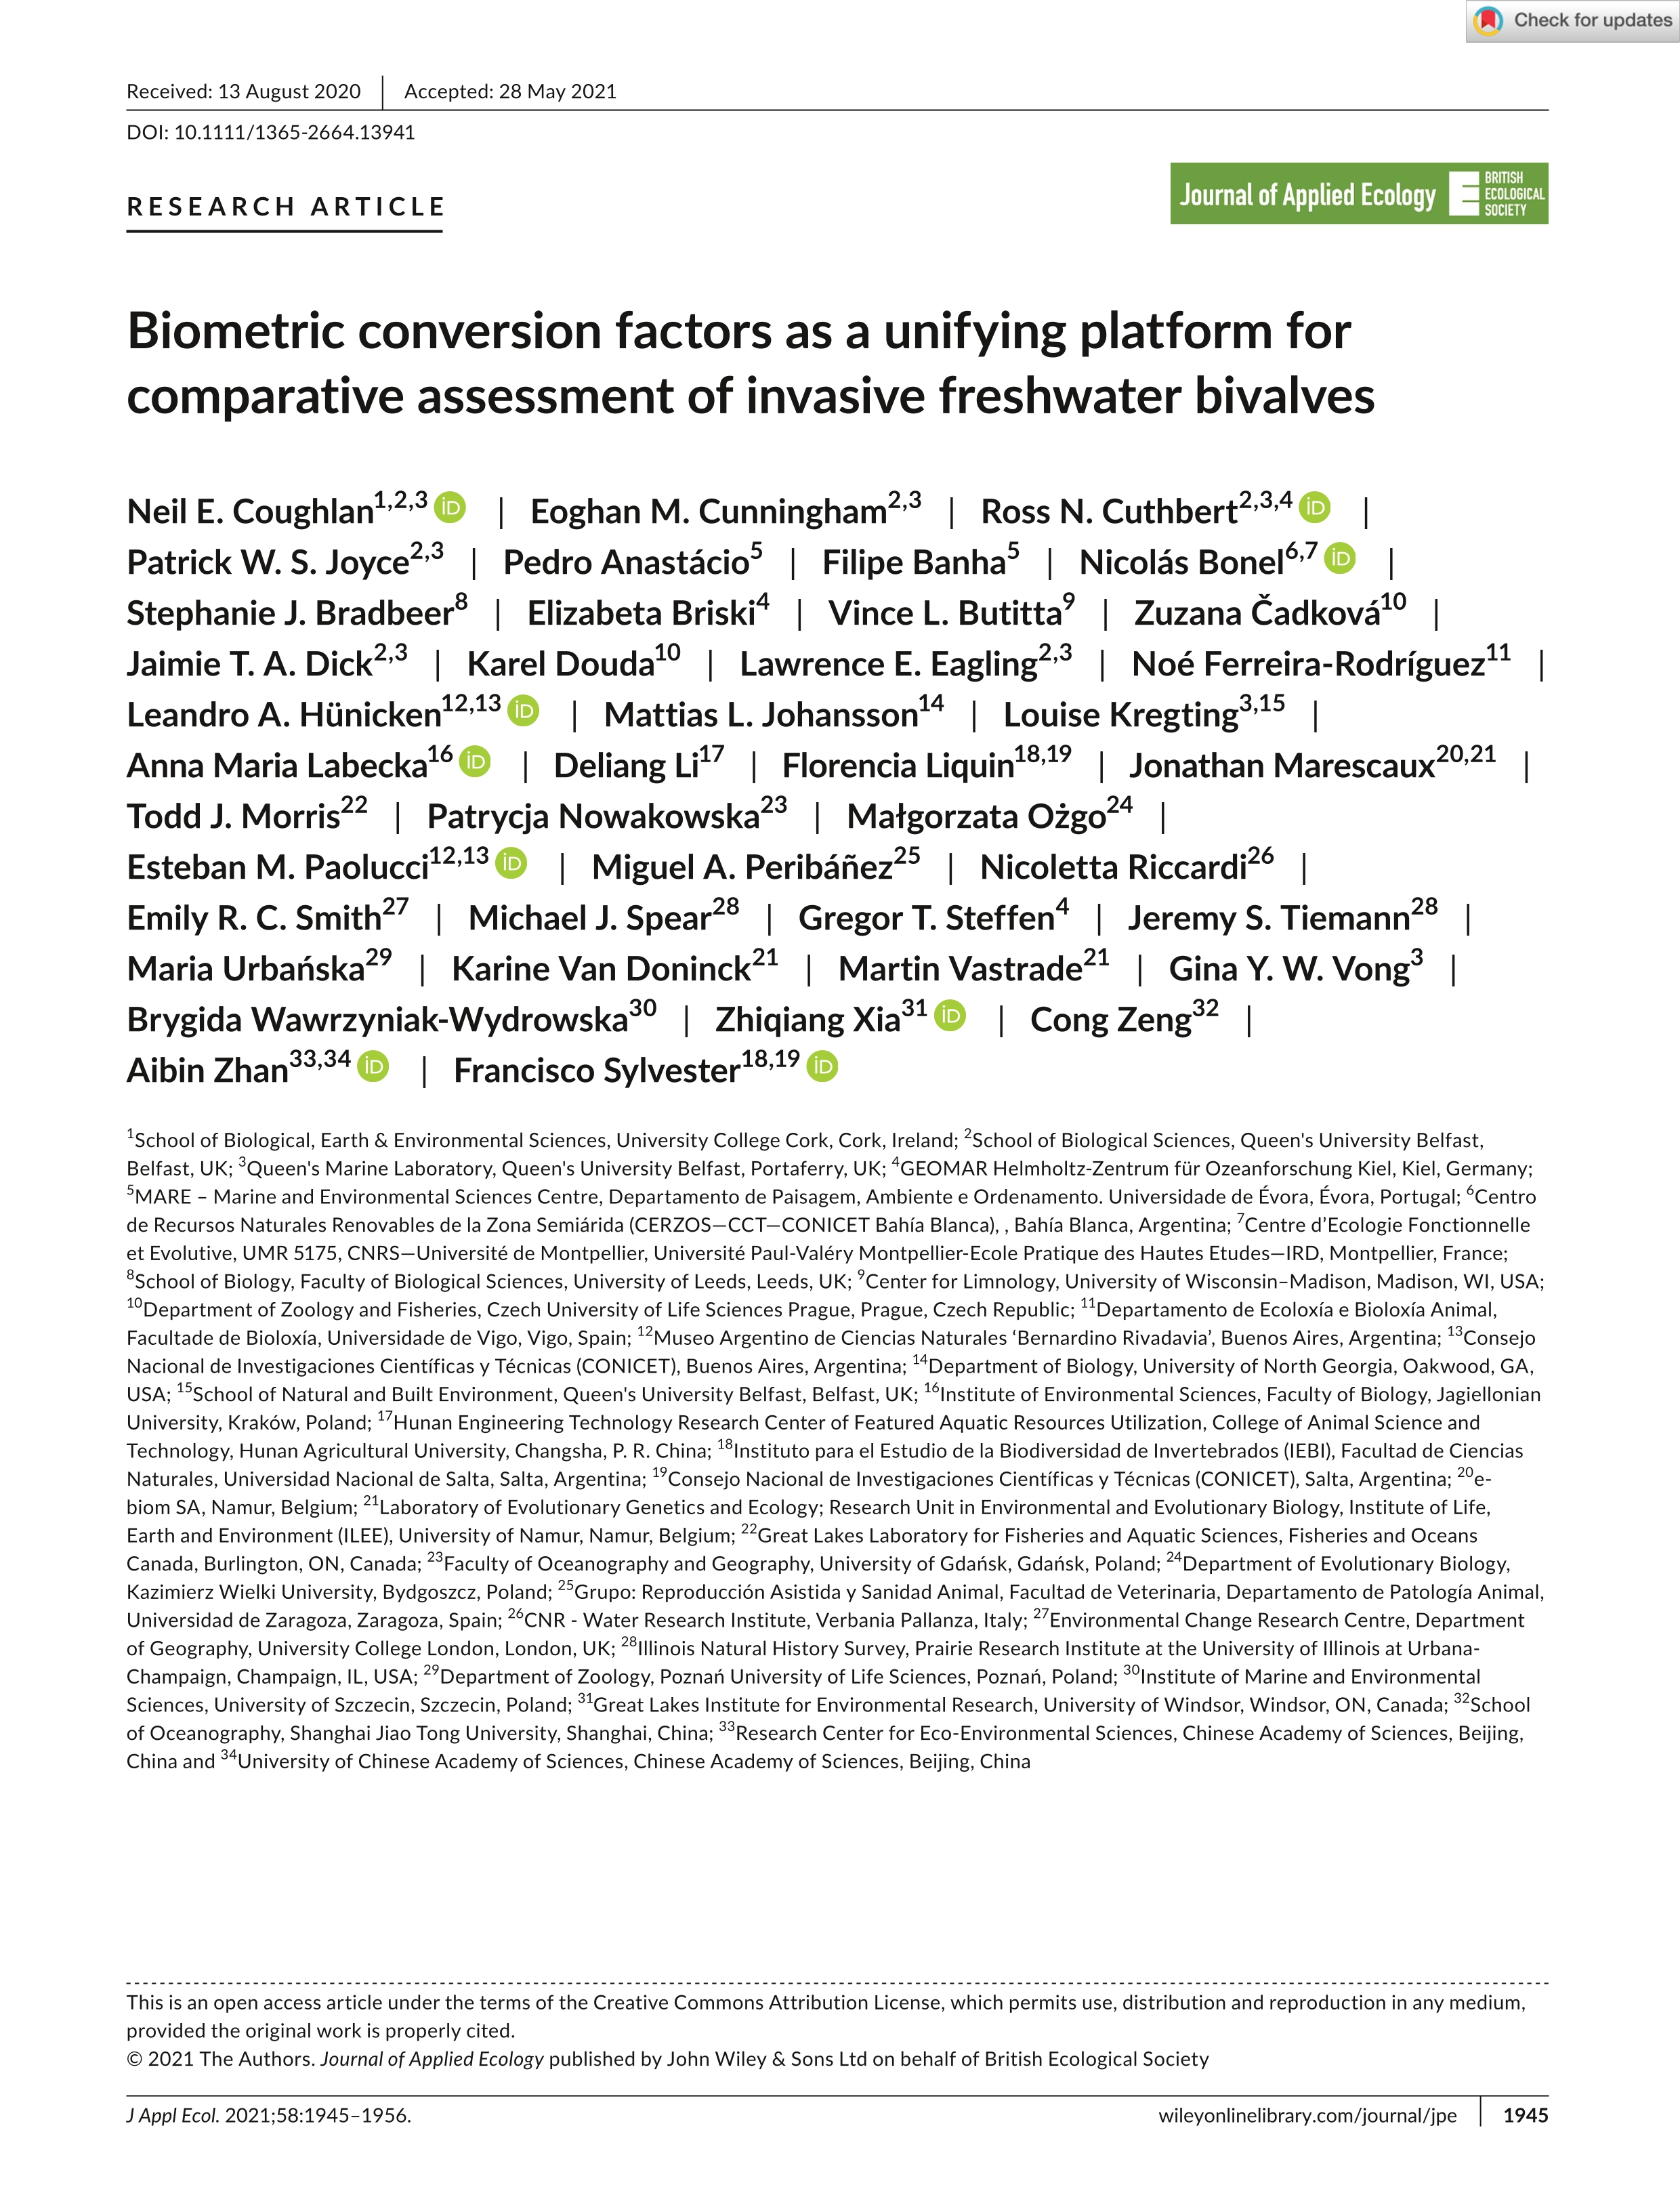 Biometric conversion factors as a unifying platform for comparative assessment of invasive freshwater bivalves